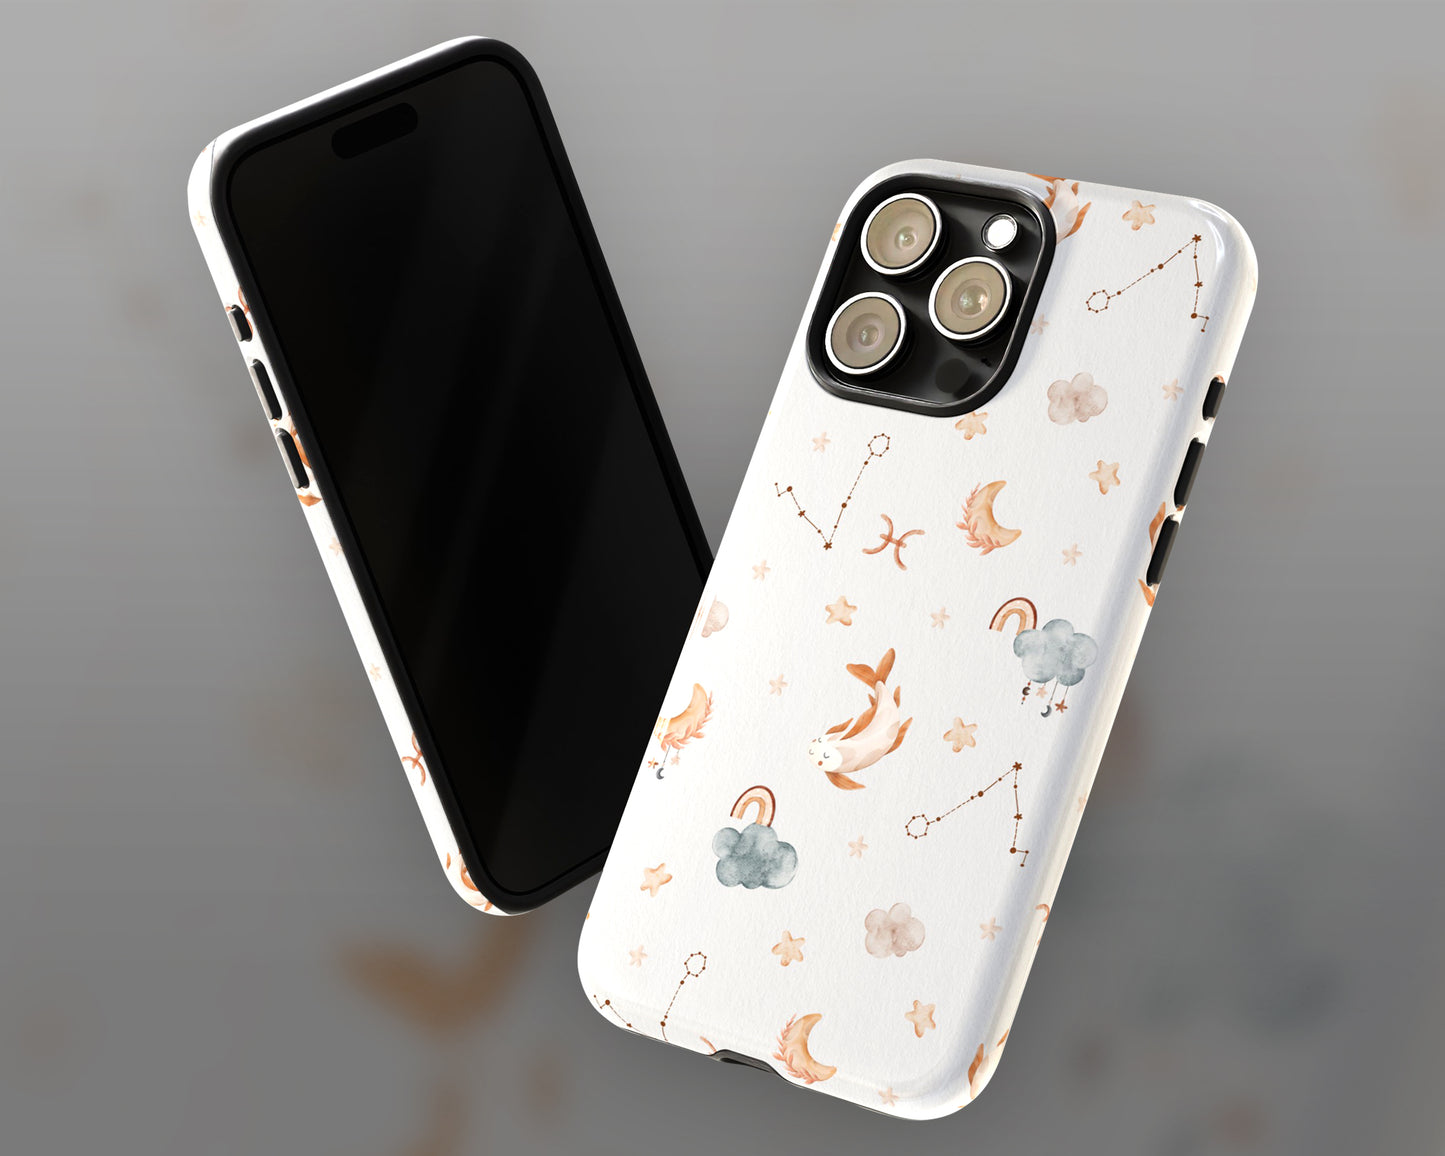 Pisces Zodiac sign watercolor baby pattern iPhone case